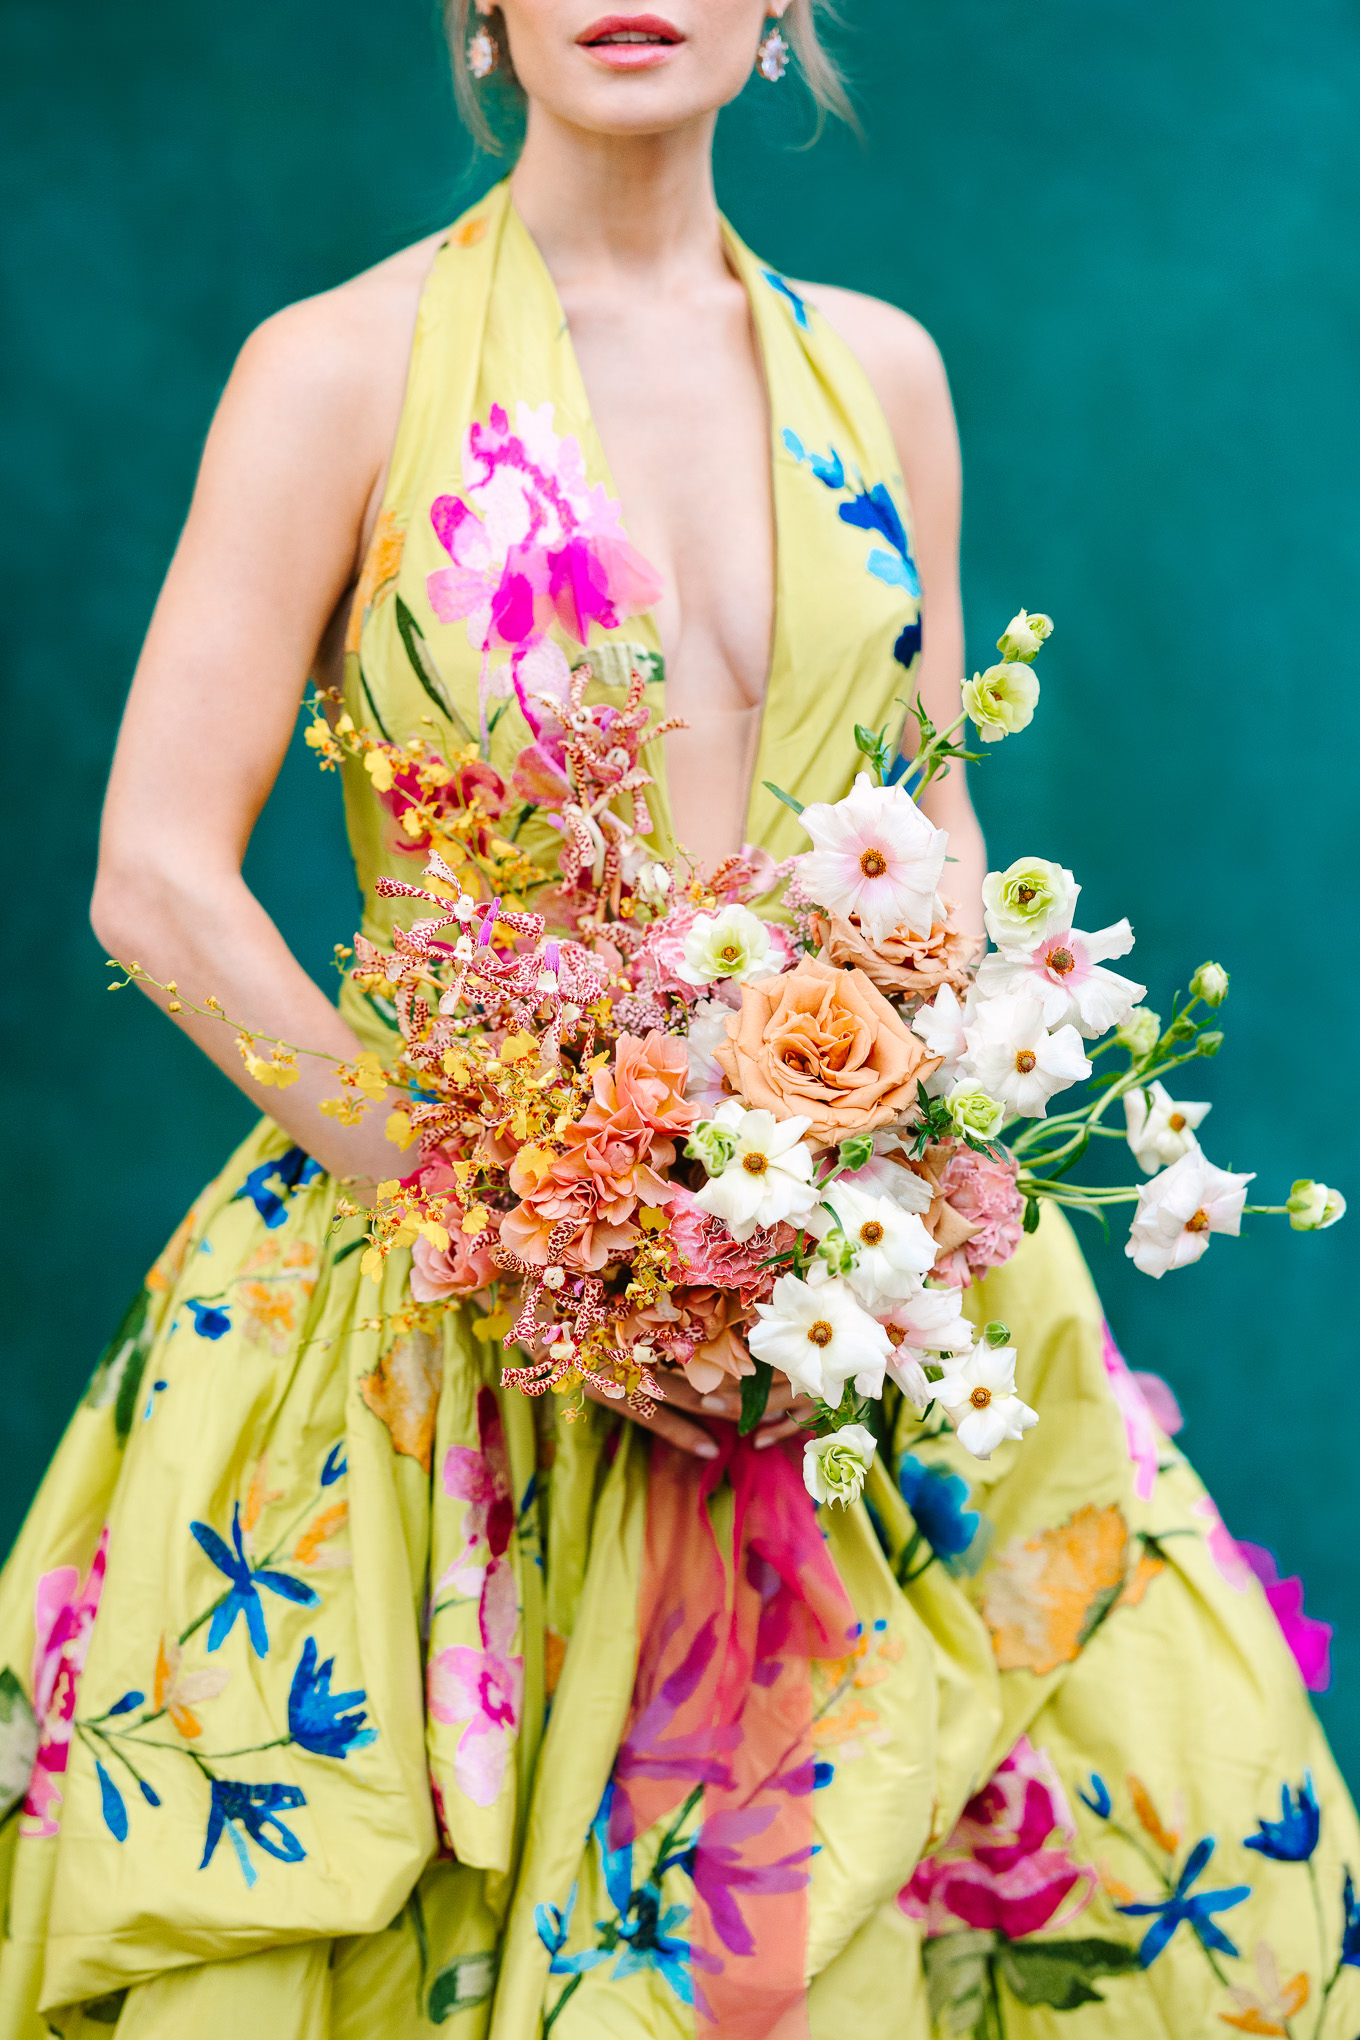 Chartreuse floral Marchesa gown on emerald painted backdrop | Kindred Presets x Mary Costa Photography Sands Hotel Ad Campaign | Colorful Palm Springs wedding photography | #palmspringsphotographer #lightroompresets #sandshotel #pinkhotel #kindredpresets  Source: Mary Costa Photography | Los Angeles